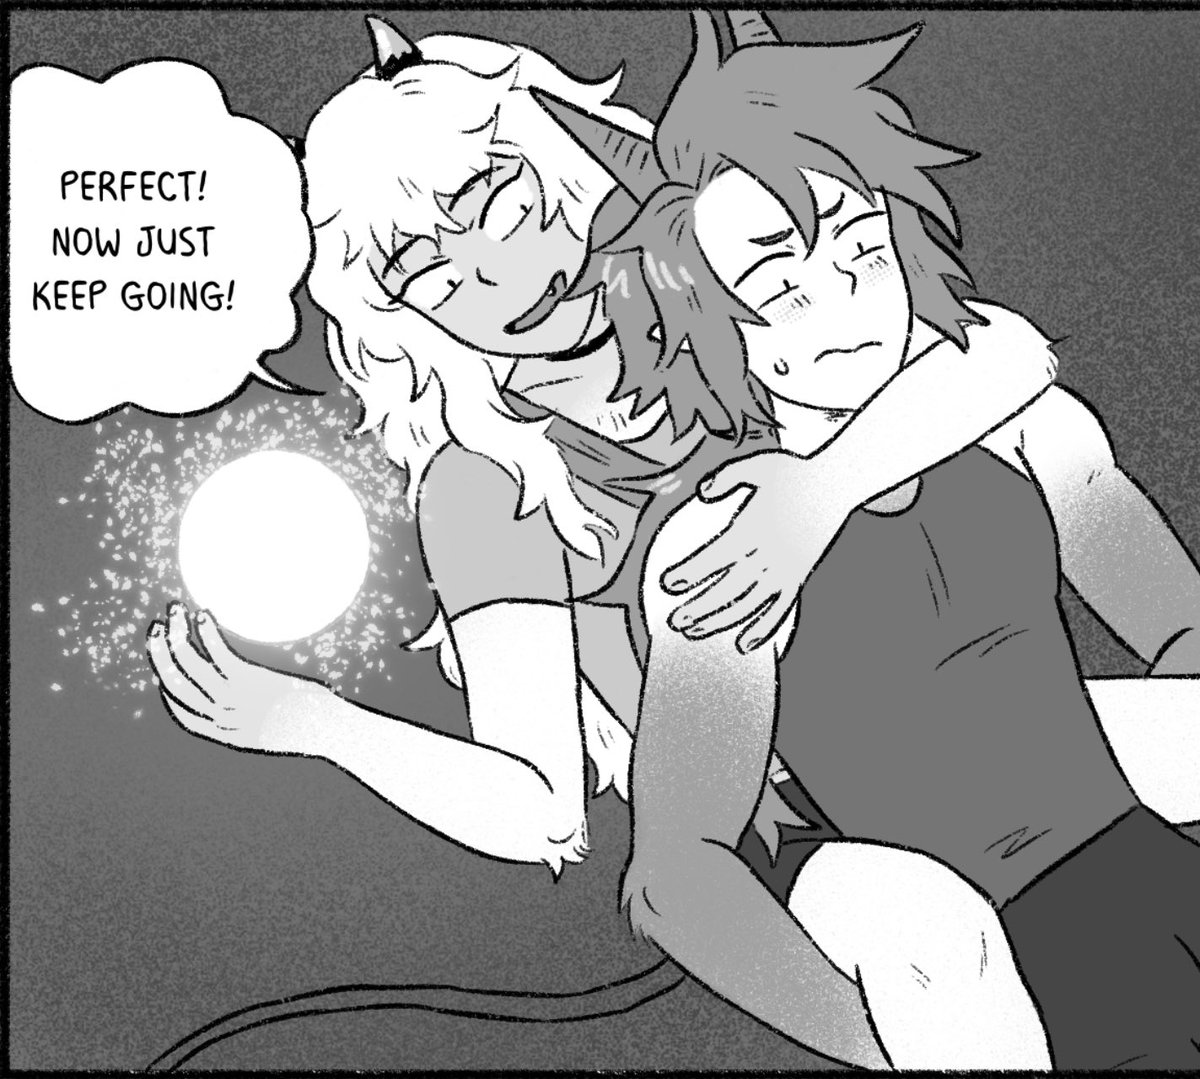 ✨Page 271 of Sparks is up!✨
Piggyback! 

✨ https://t.co/HYomfoRV66
✨Tapas https://t.co/qukHtMJljJ
✨Support & read ahead https://t.co/Pkf9mTOYyv 